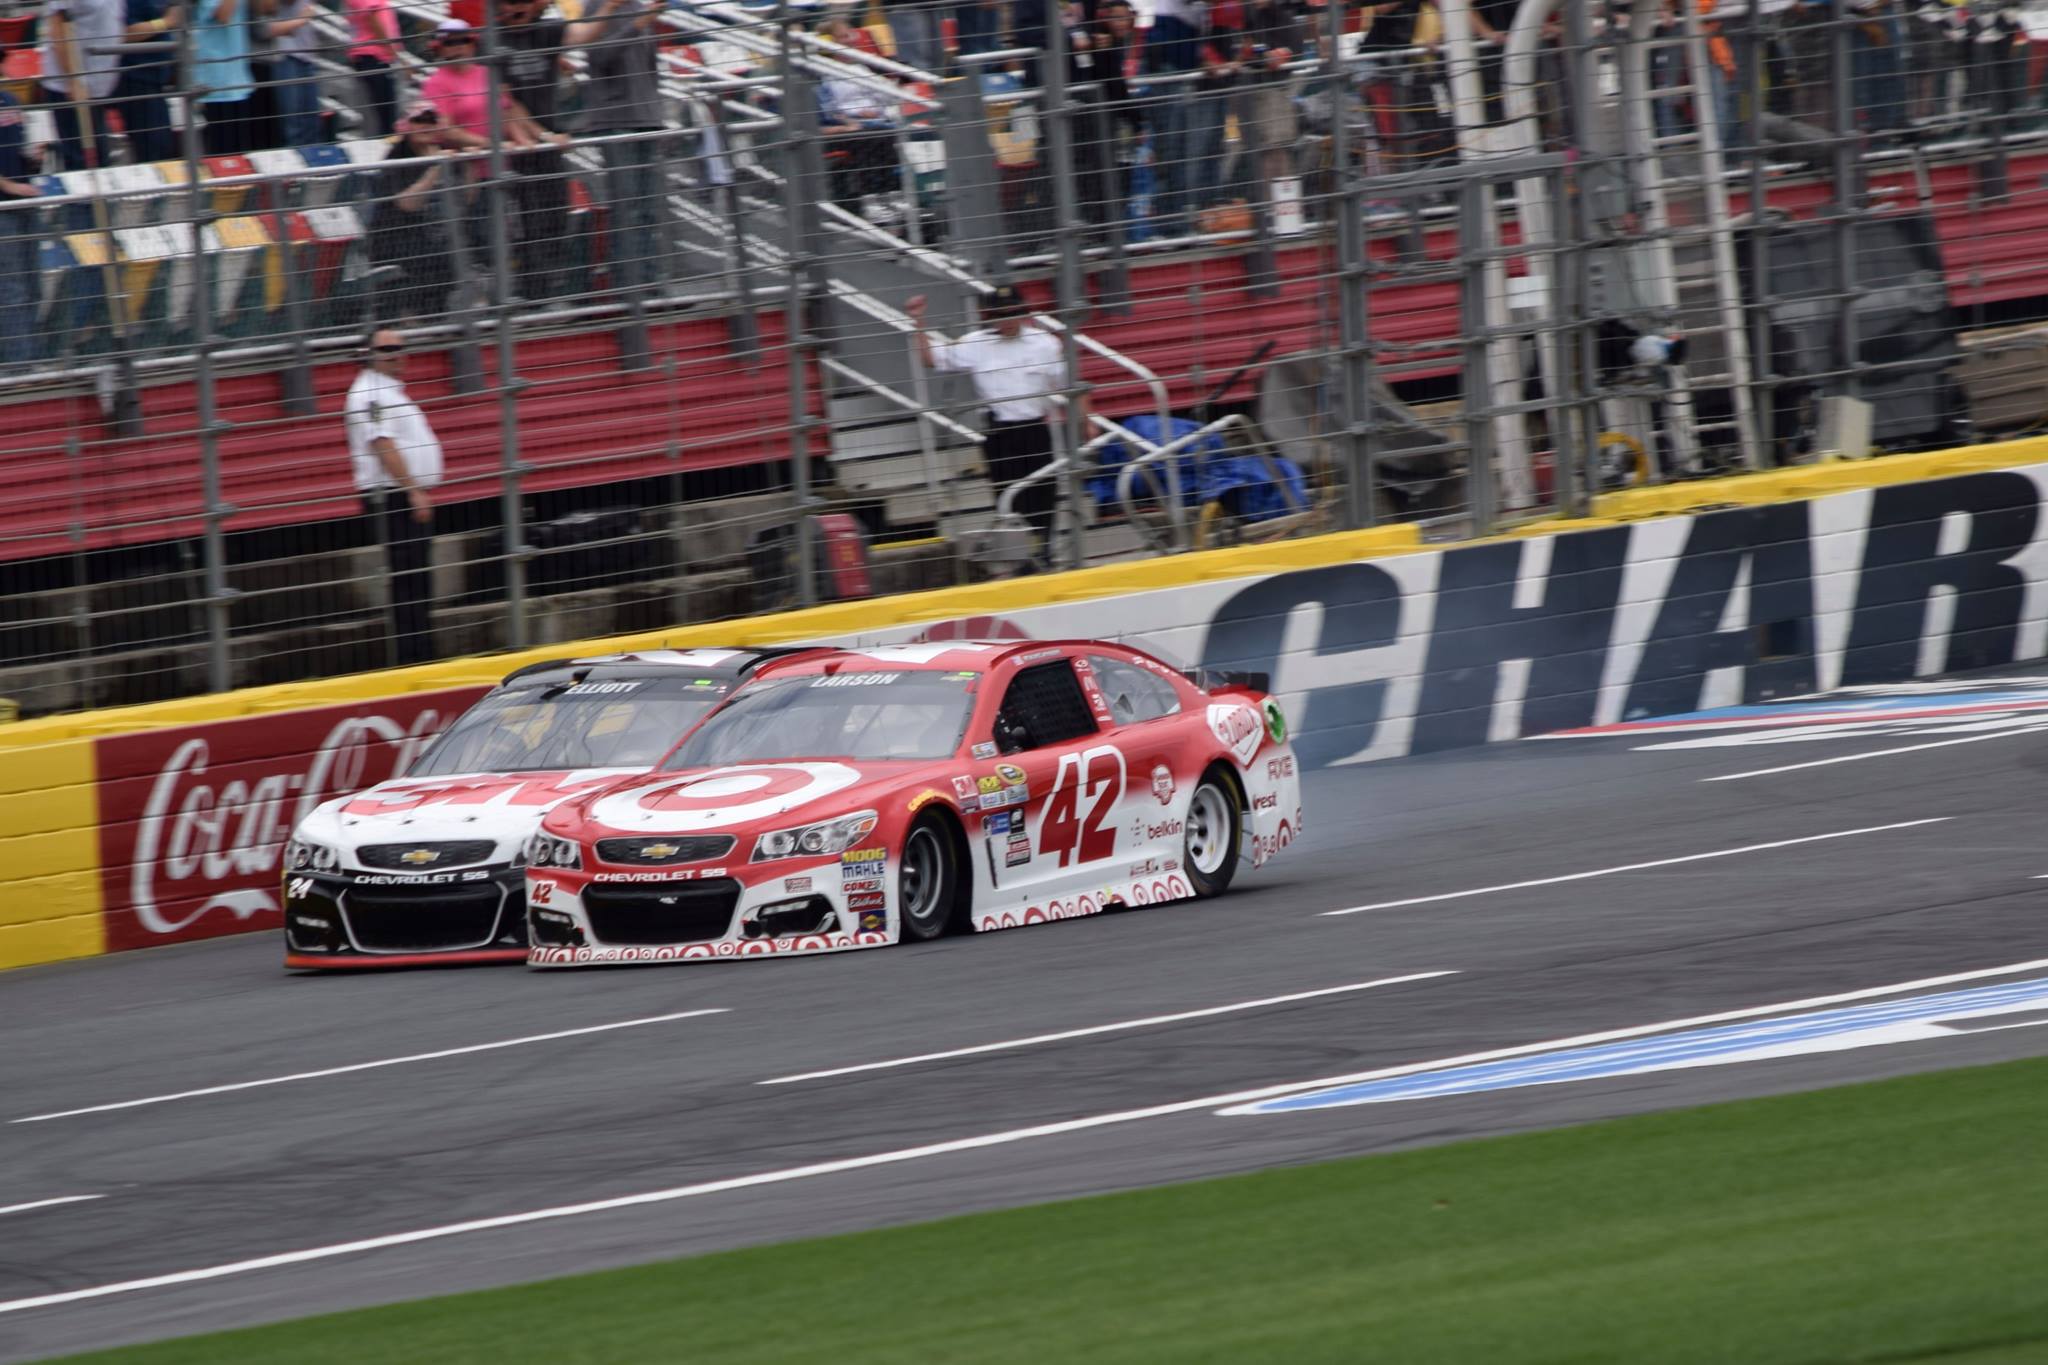 Kyle Larson and Chase Elliott battled hard for the win in the Sprint Showdown at Charlotte. (Photo Credit: Zach Darrow of TPF)